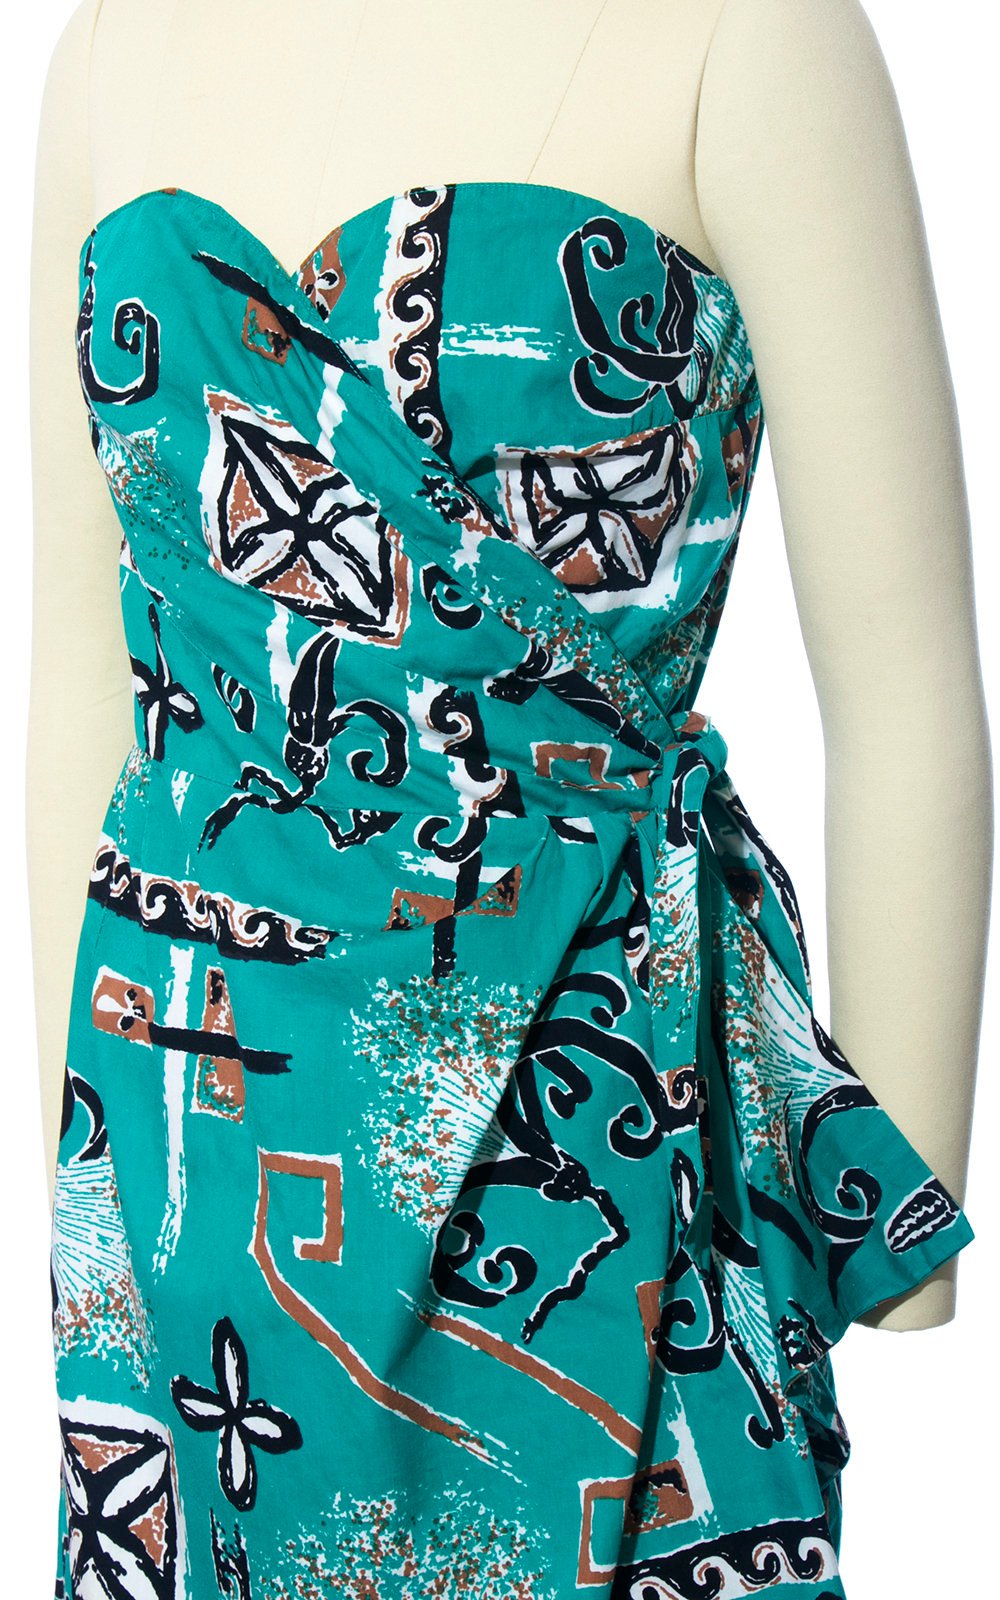 Vintage 1950s Sarong Dress | 50s ALFRED SHAHEEN Hawaiian Novelty Print Floral Cotton Teal Strapless Wiggle Wrap Tiki Sundress (small)